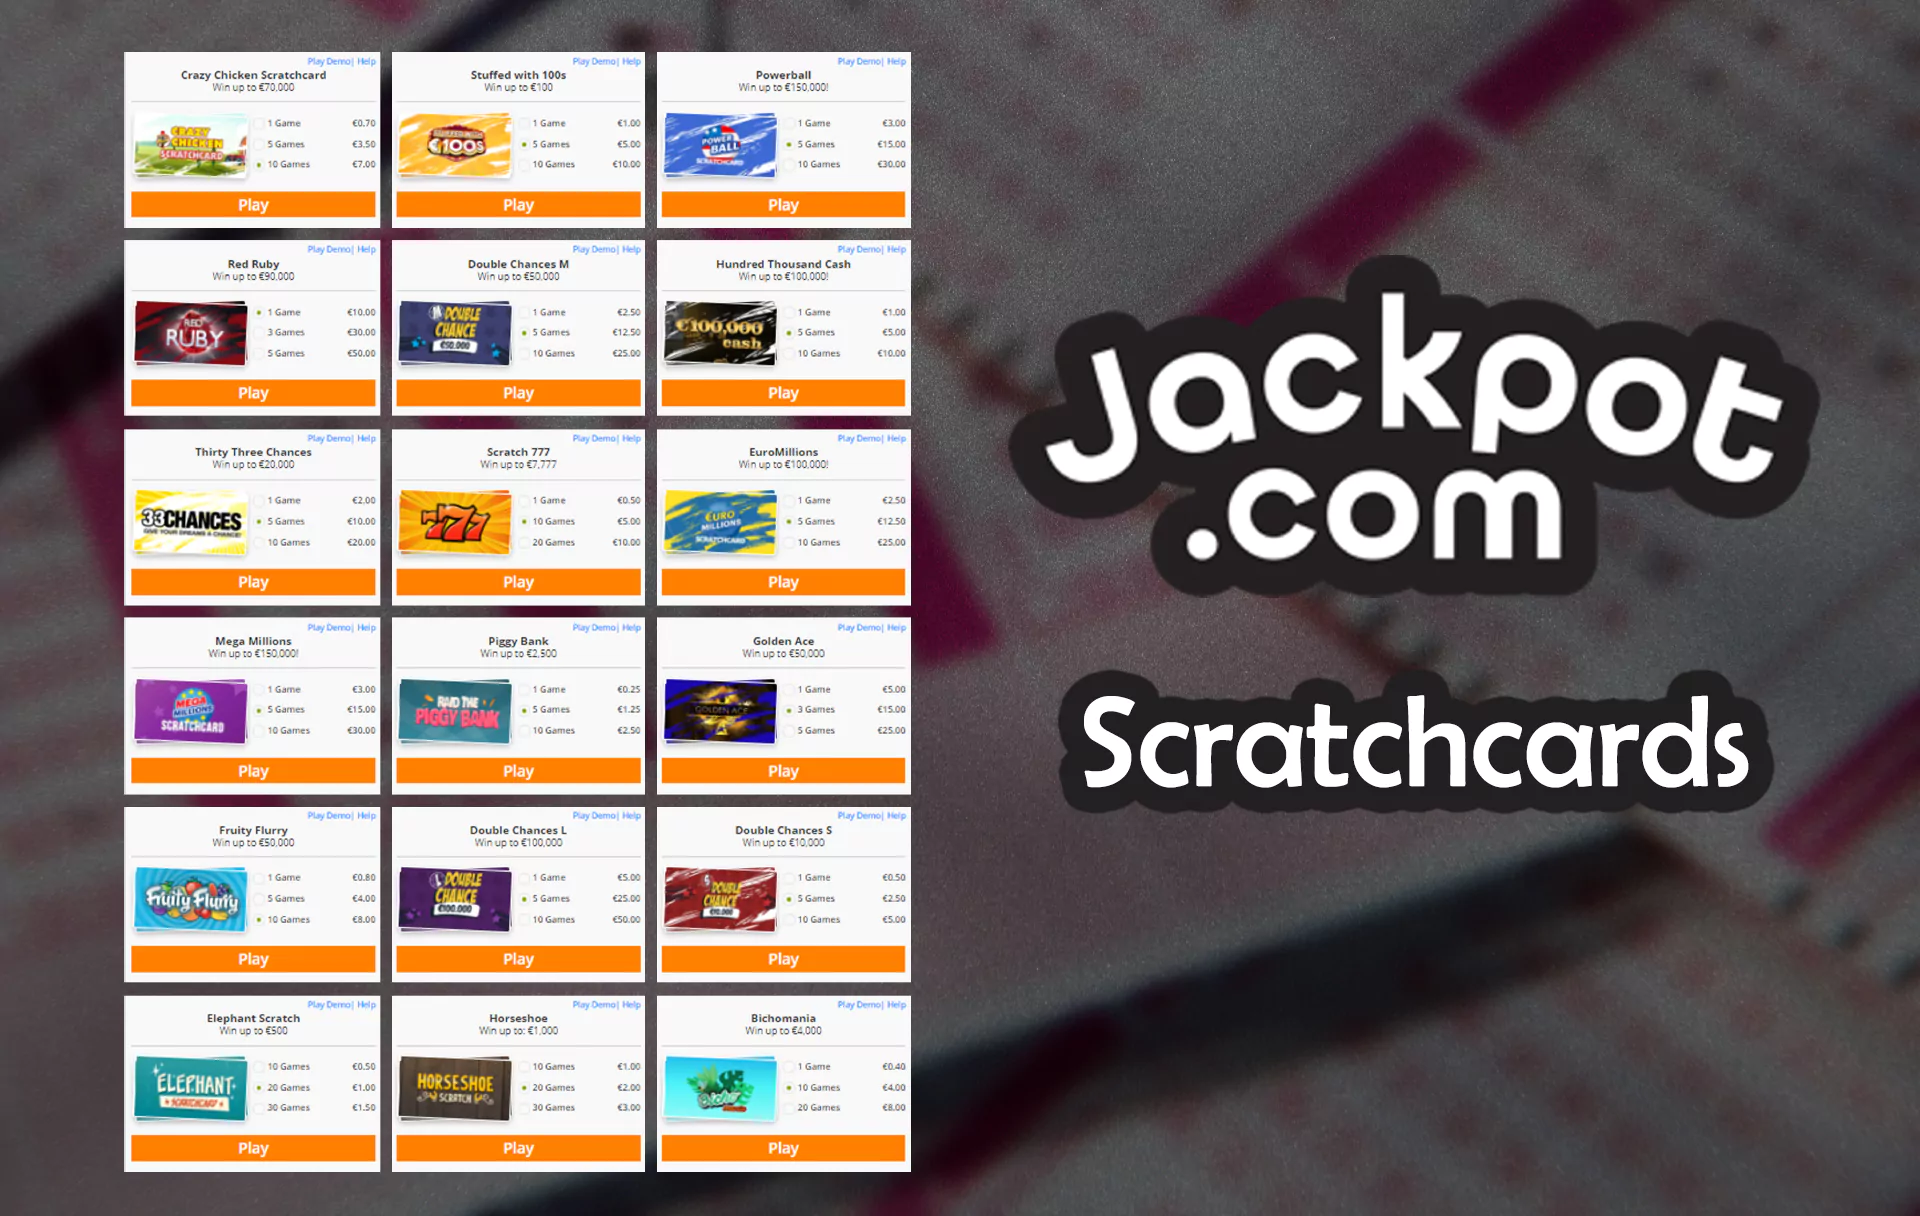 Scratchcards are also a popular type of raffle on the site.